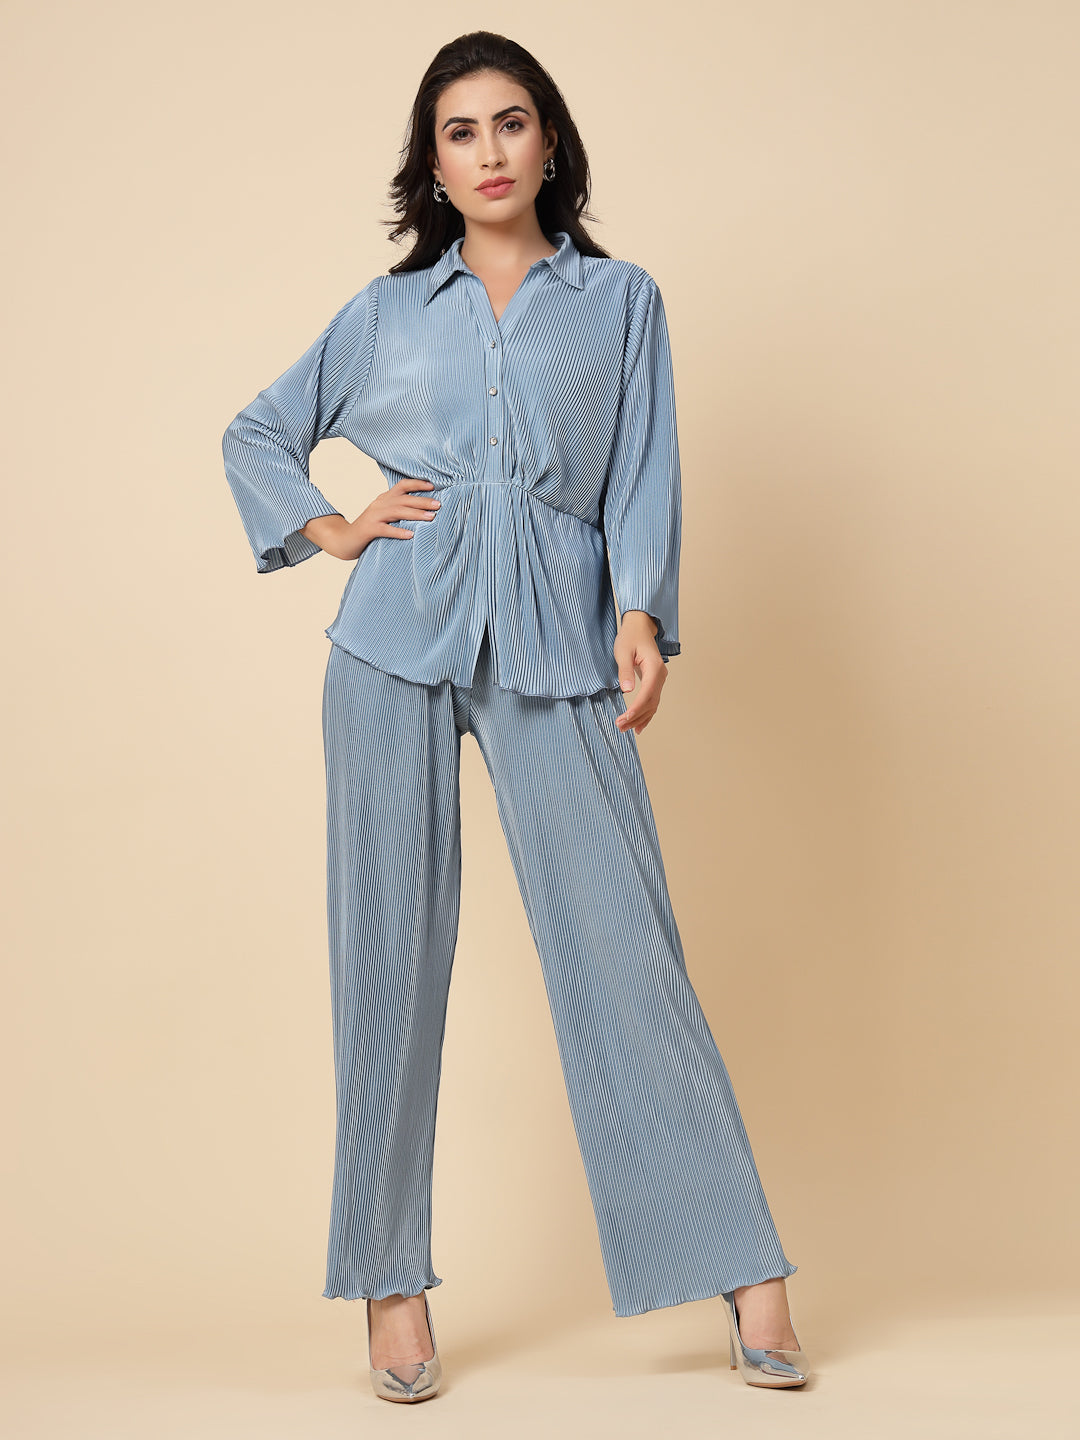 Gipsy Women Space Blue Solid Satin 3/4 Sleeve Collared Neck Cord Set